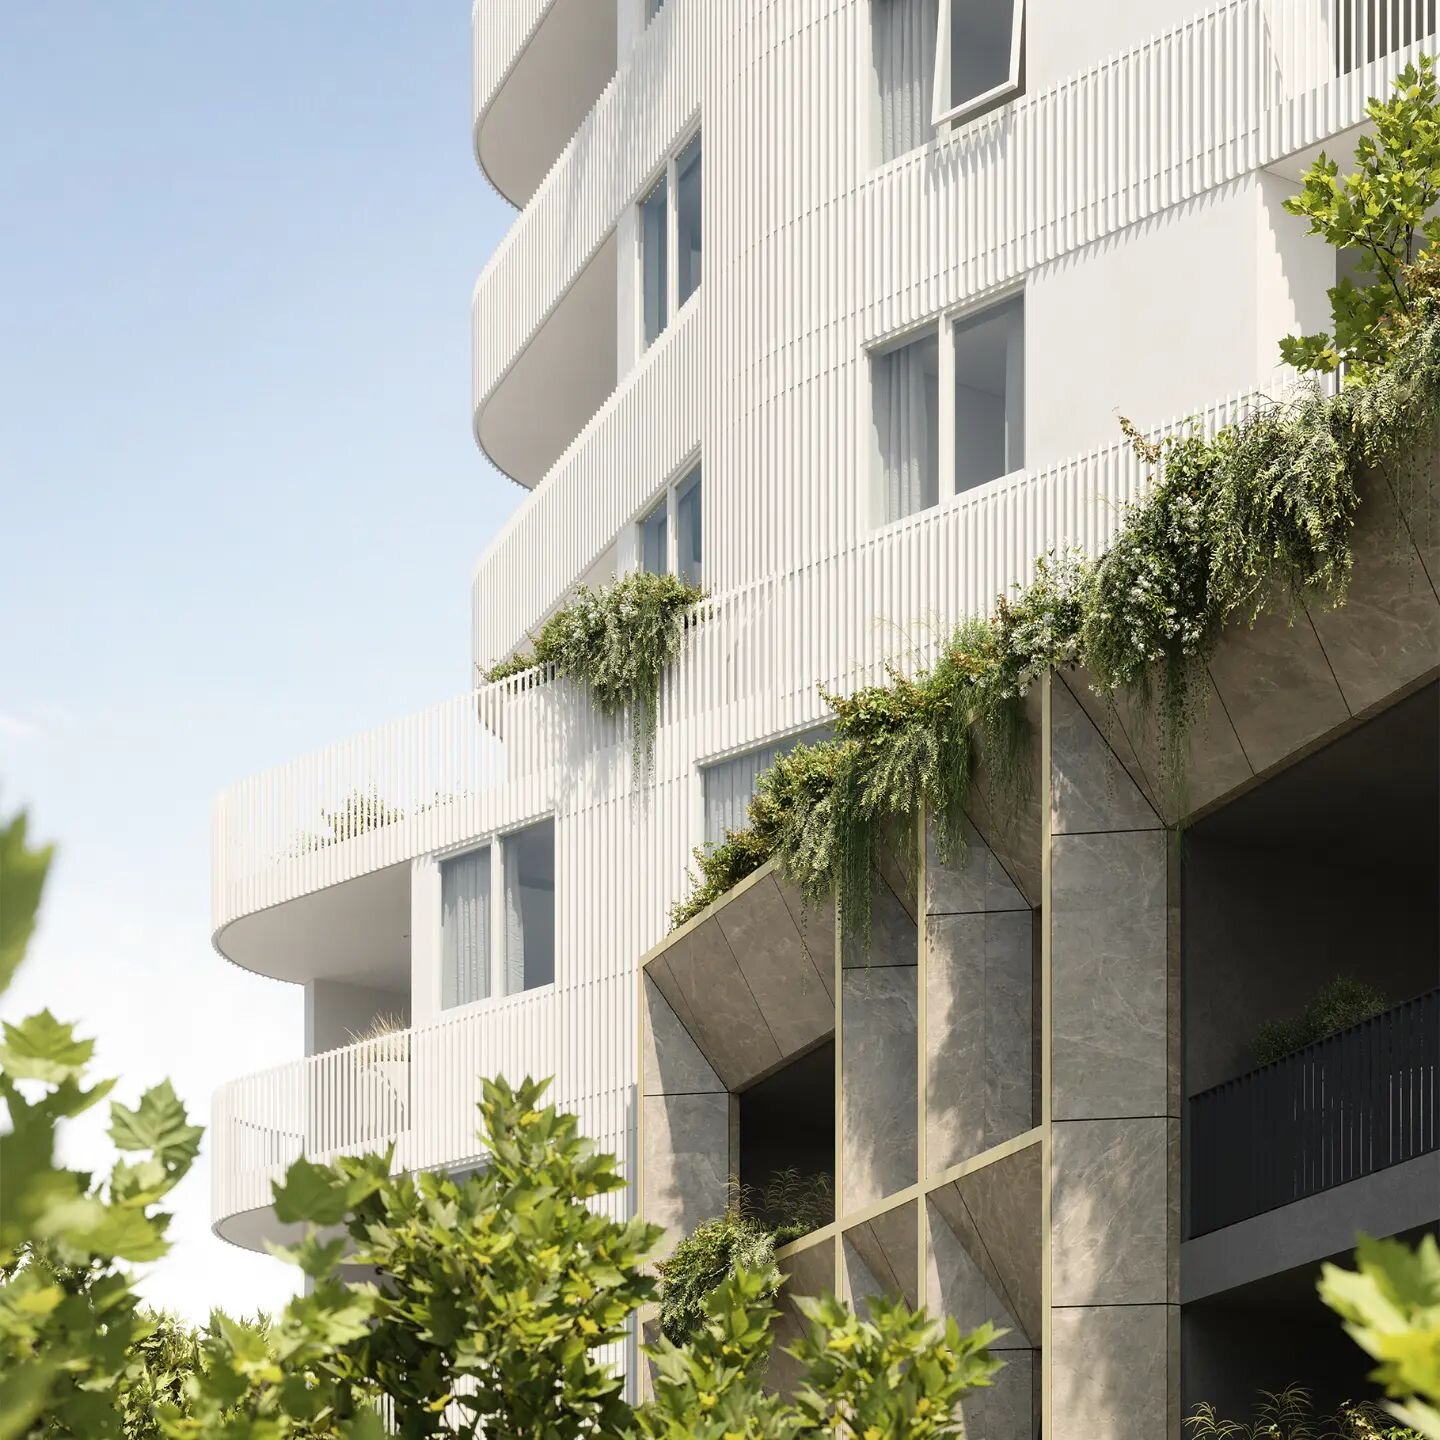 Our design for Foret Nedlands features a refined white batten tower delicately balanced with a warm textural marble clad podium. The connection between these two elements is further articulated with lush, cascading landscaping. Project launching soon